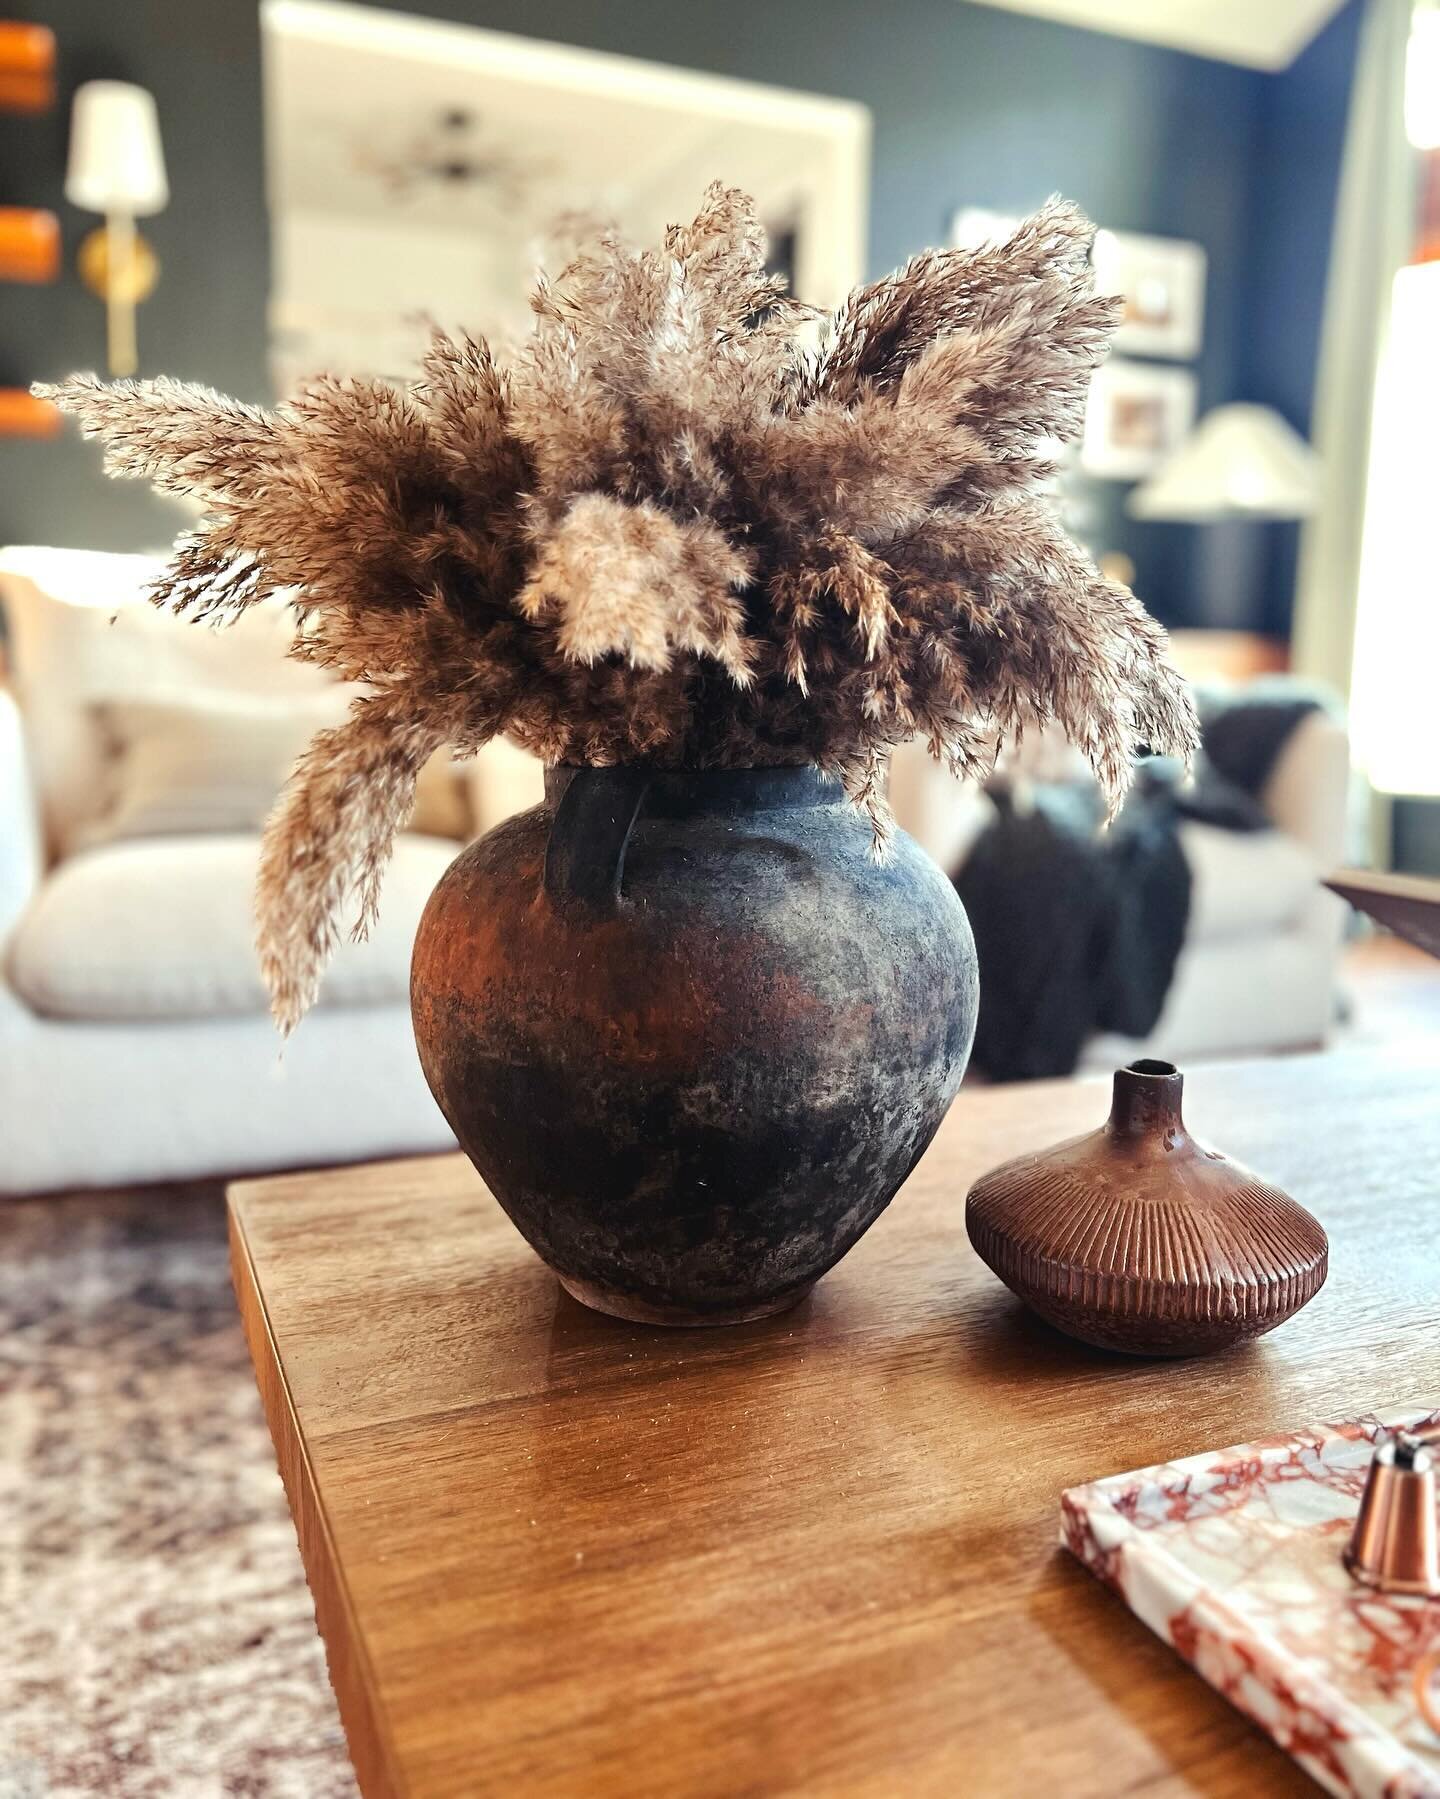 I procured this stunning vessel from an artist named Maria in Kyiv, Poland. I&rsquo;ve been in love with it since purchase. Such beautiful smokey tones and swirls of rust. Don&rsquo;t get me started on the texture. I would highly recommend! Check out